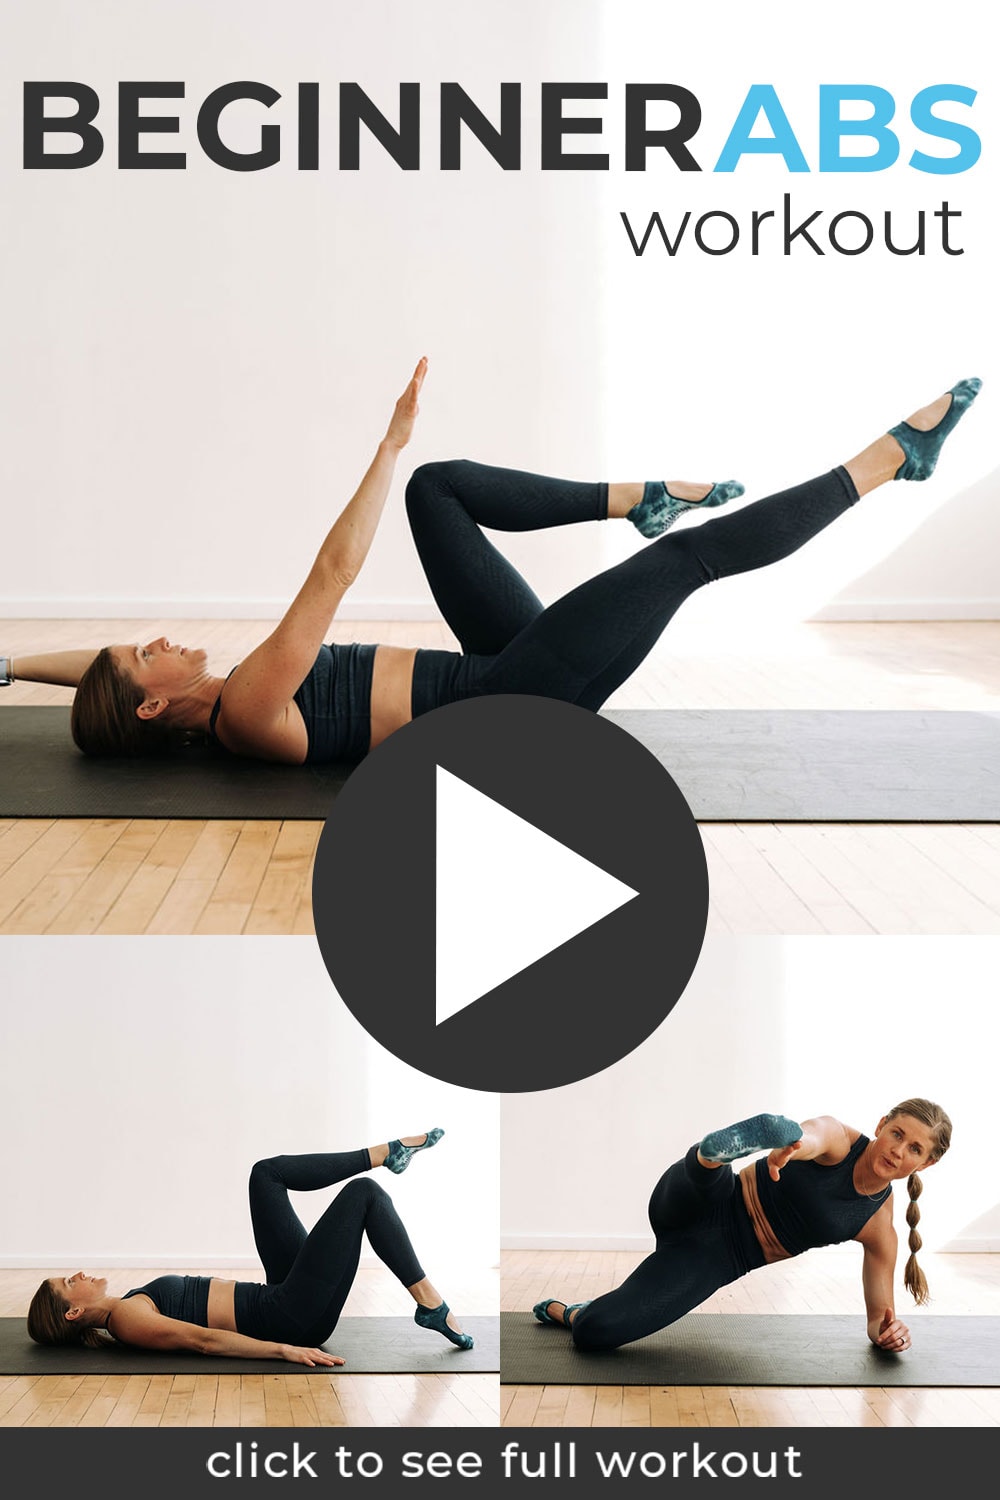 5 Minute Beginner Ab Workout Video Nourish Move Love